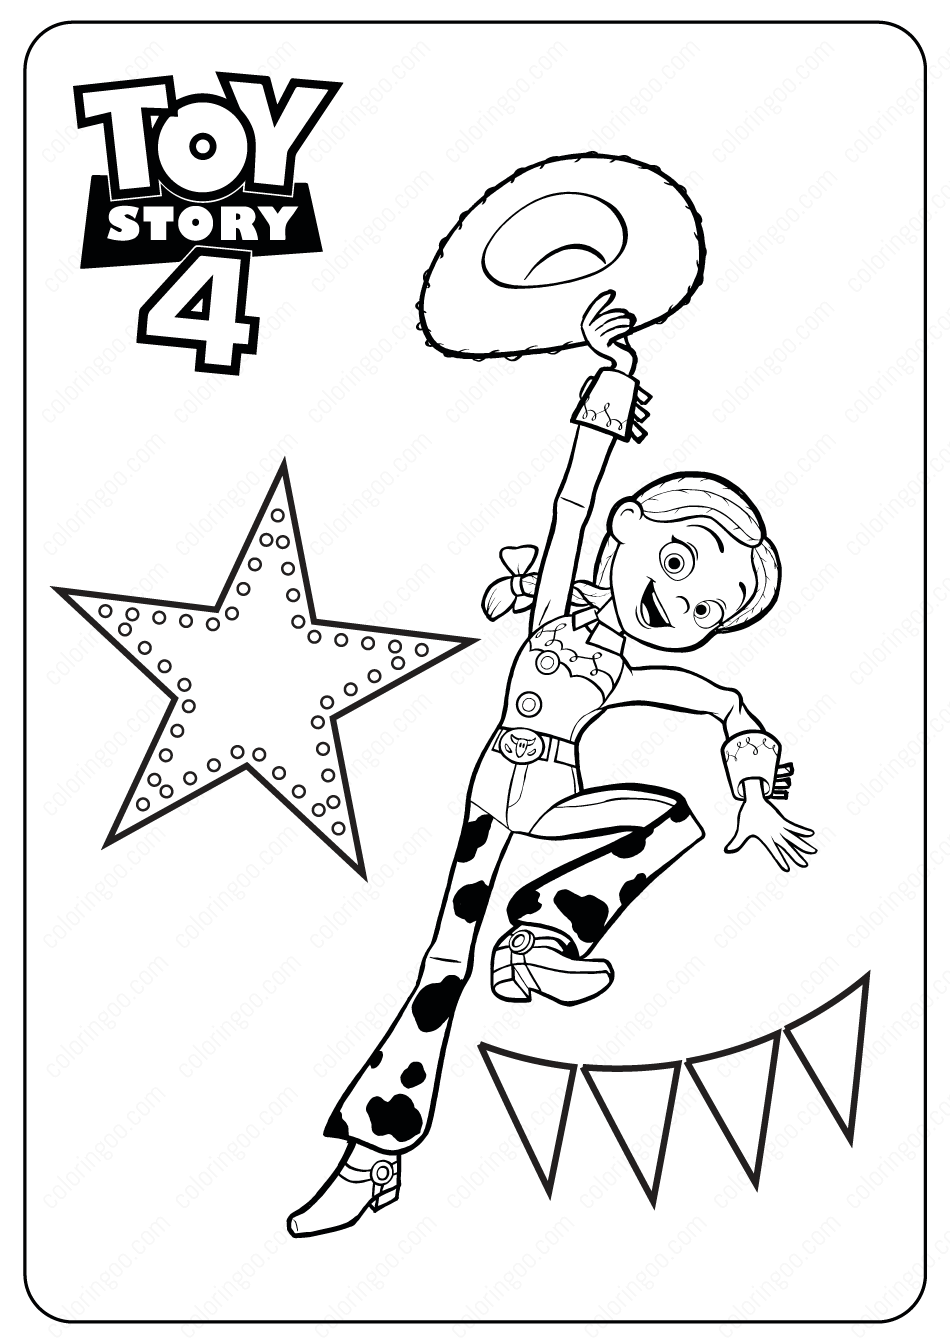 toy story 4 jessie coloring pages 04